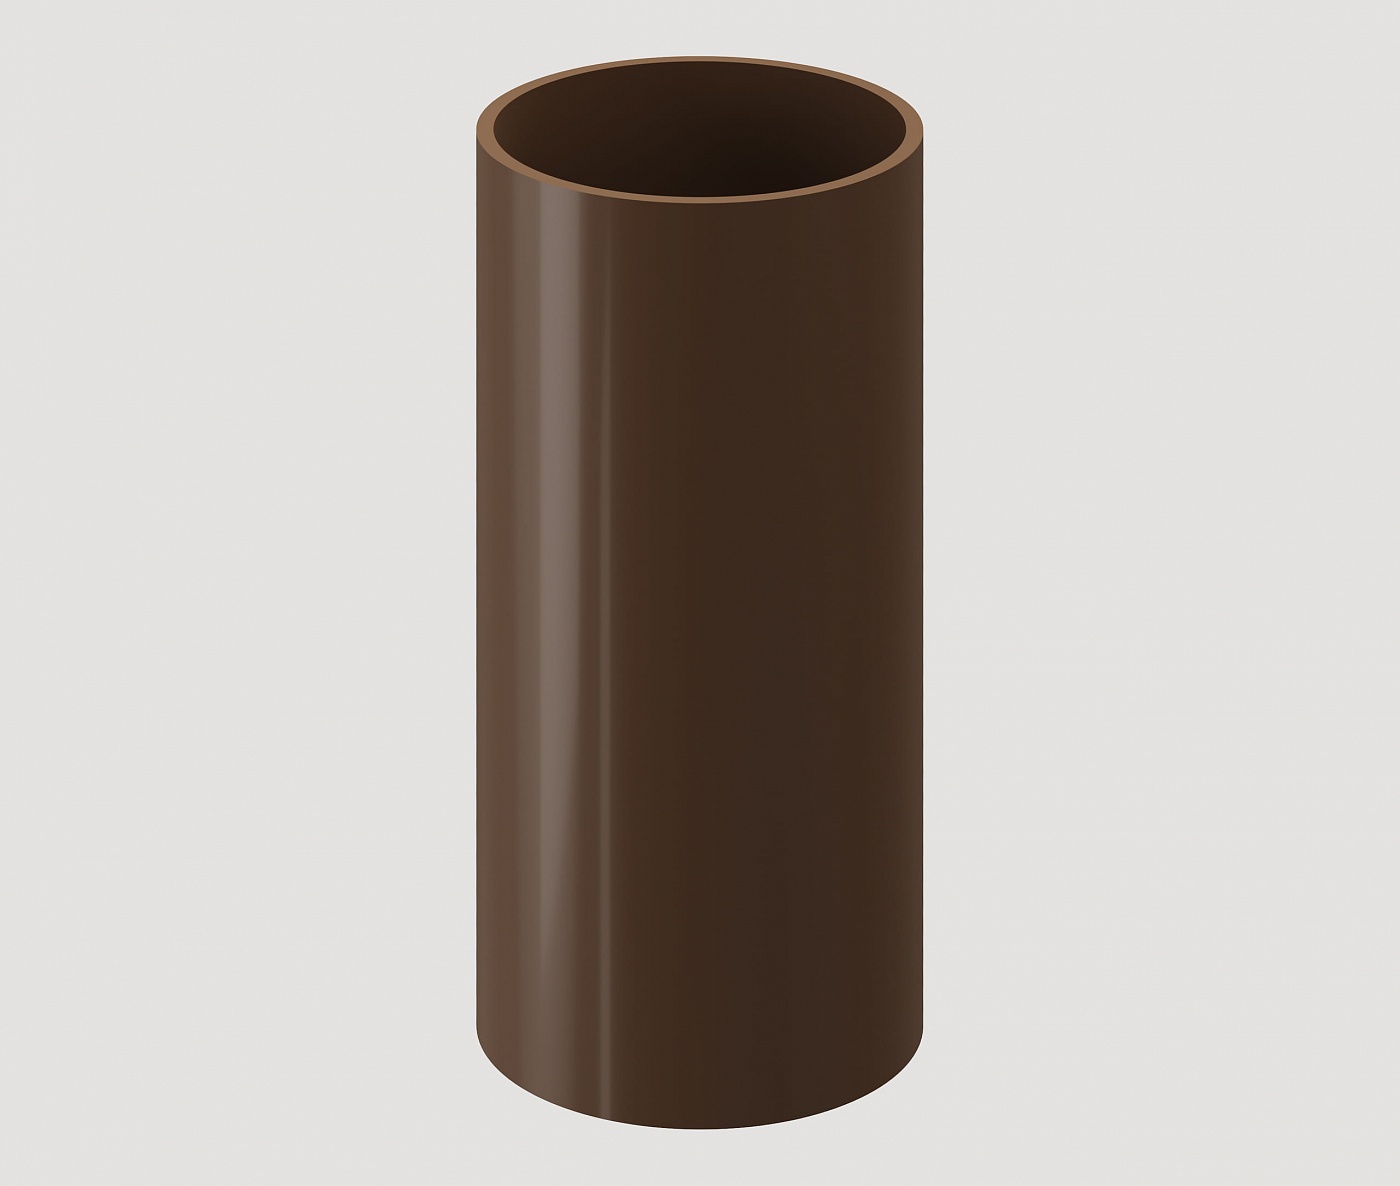 Водостоки - STANDARD SERIES Light brown RAL 8019 - Elements of the drainage system - Pipe 1m